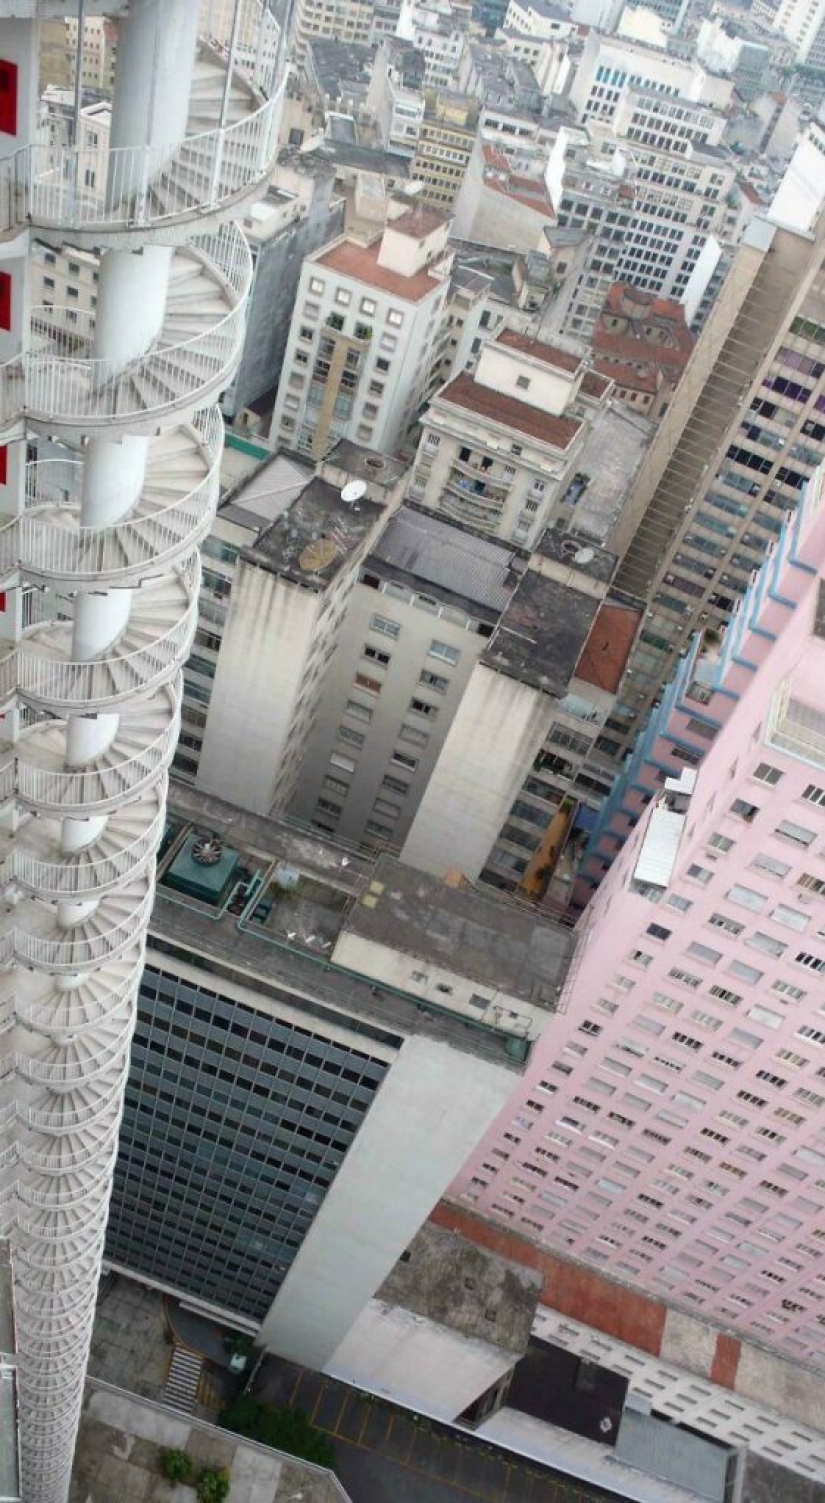 Frightening photos of great heights